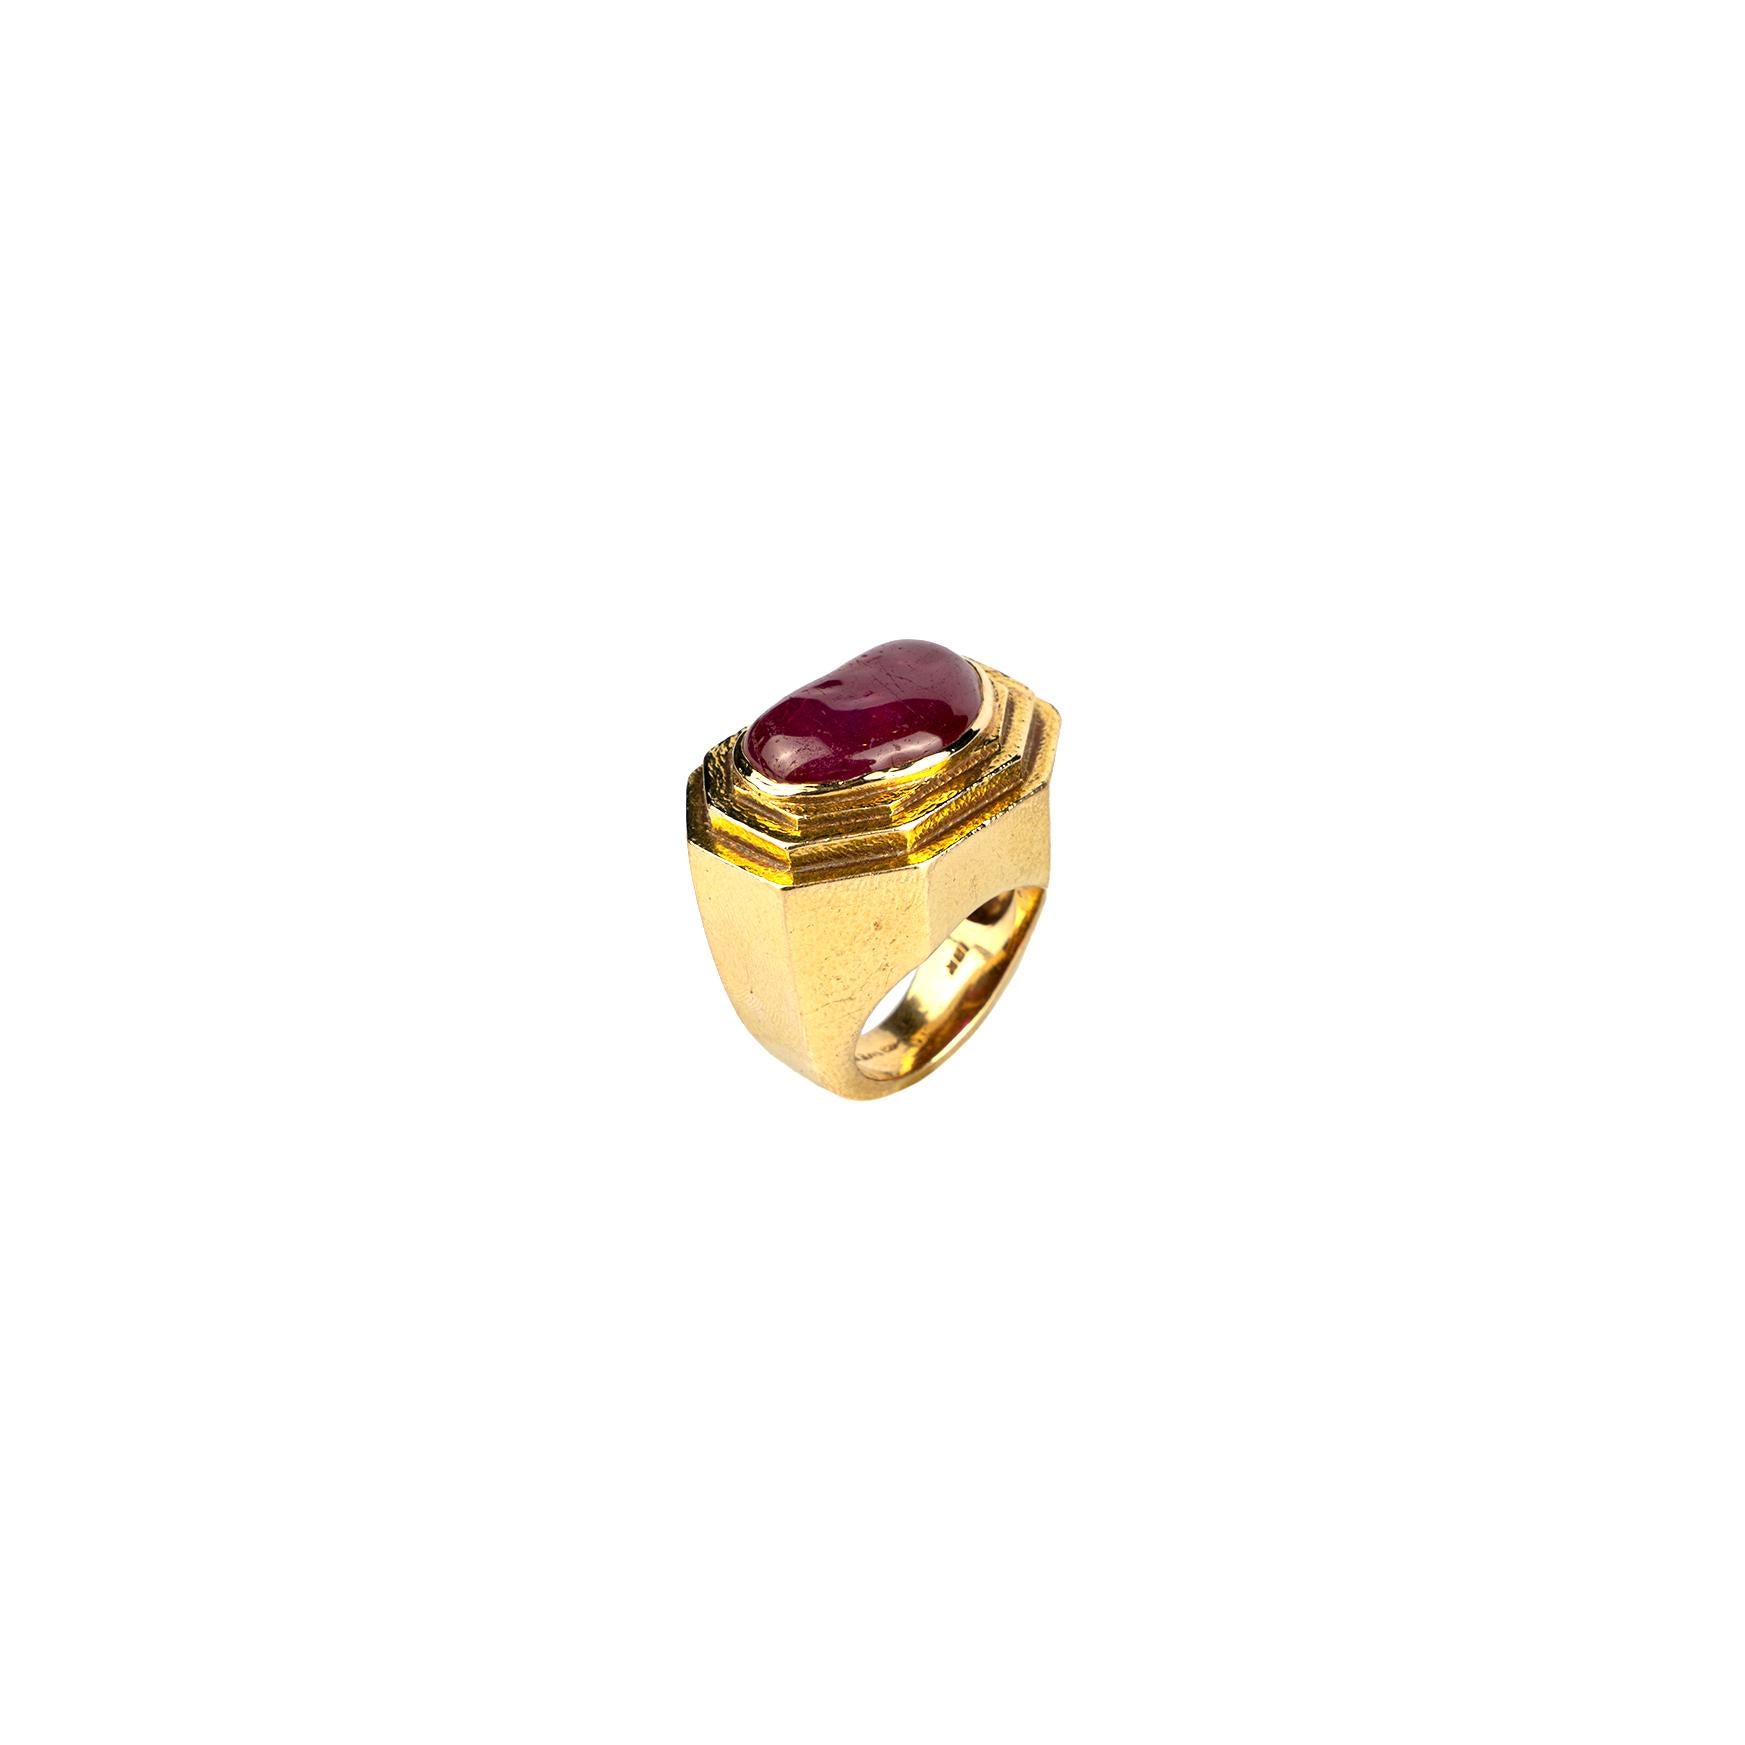 A sumptuous David Webb ring showcasing a heart shaped cabochon Burma ruby mounted on a hammered 18k yellow gold shank.
Made in America, circa 1970.